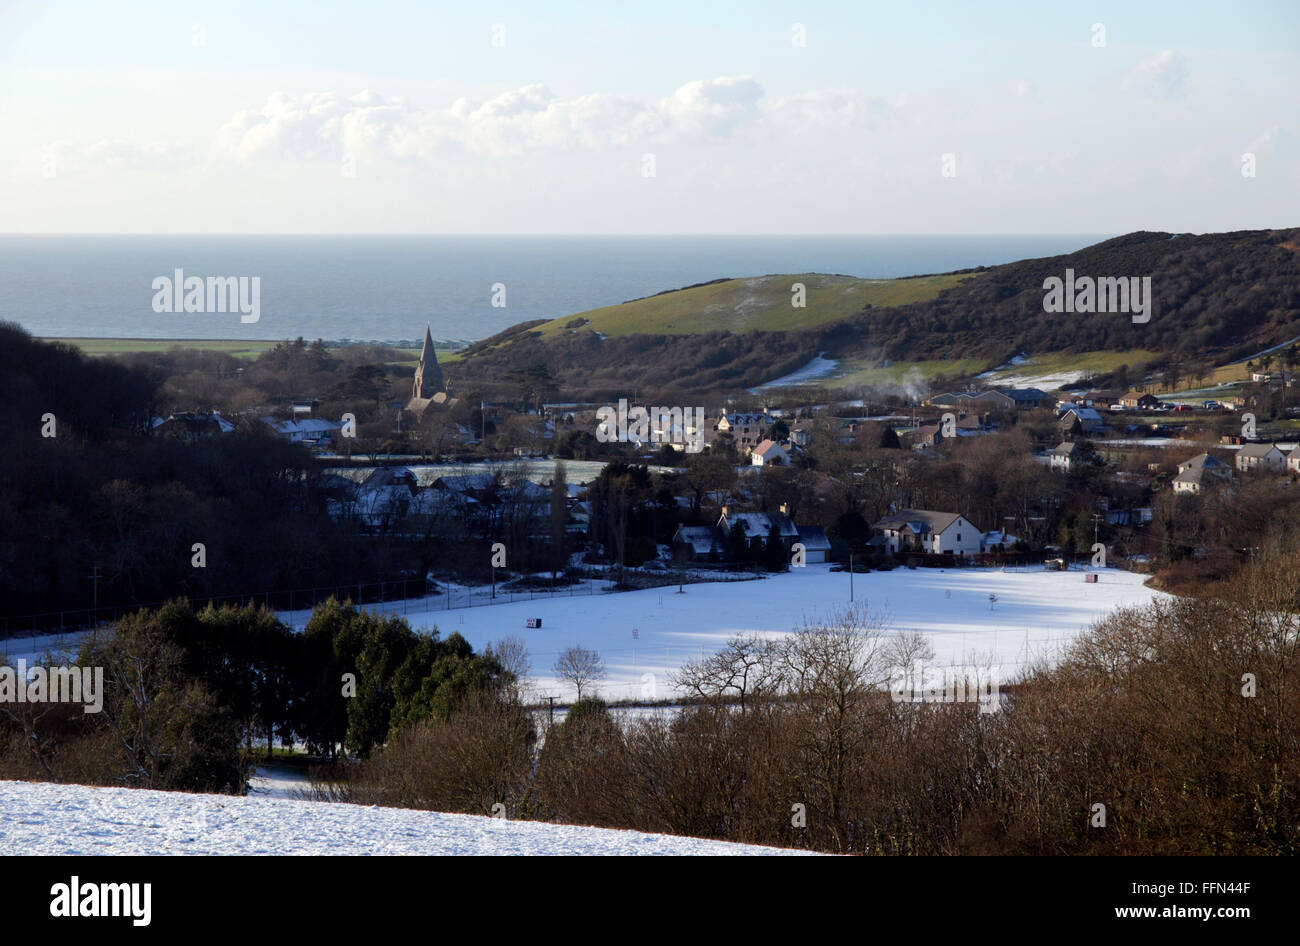 Looking down on Llanrhystud, Ceredigion, showing the nineteenth century church and the golf course under snow. Stock Photo